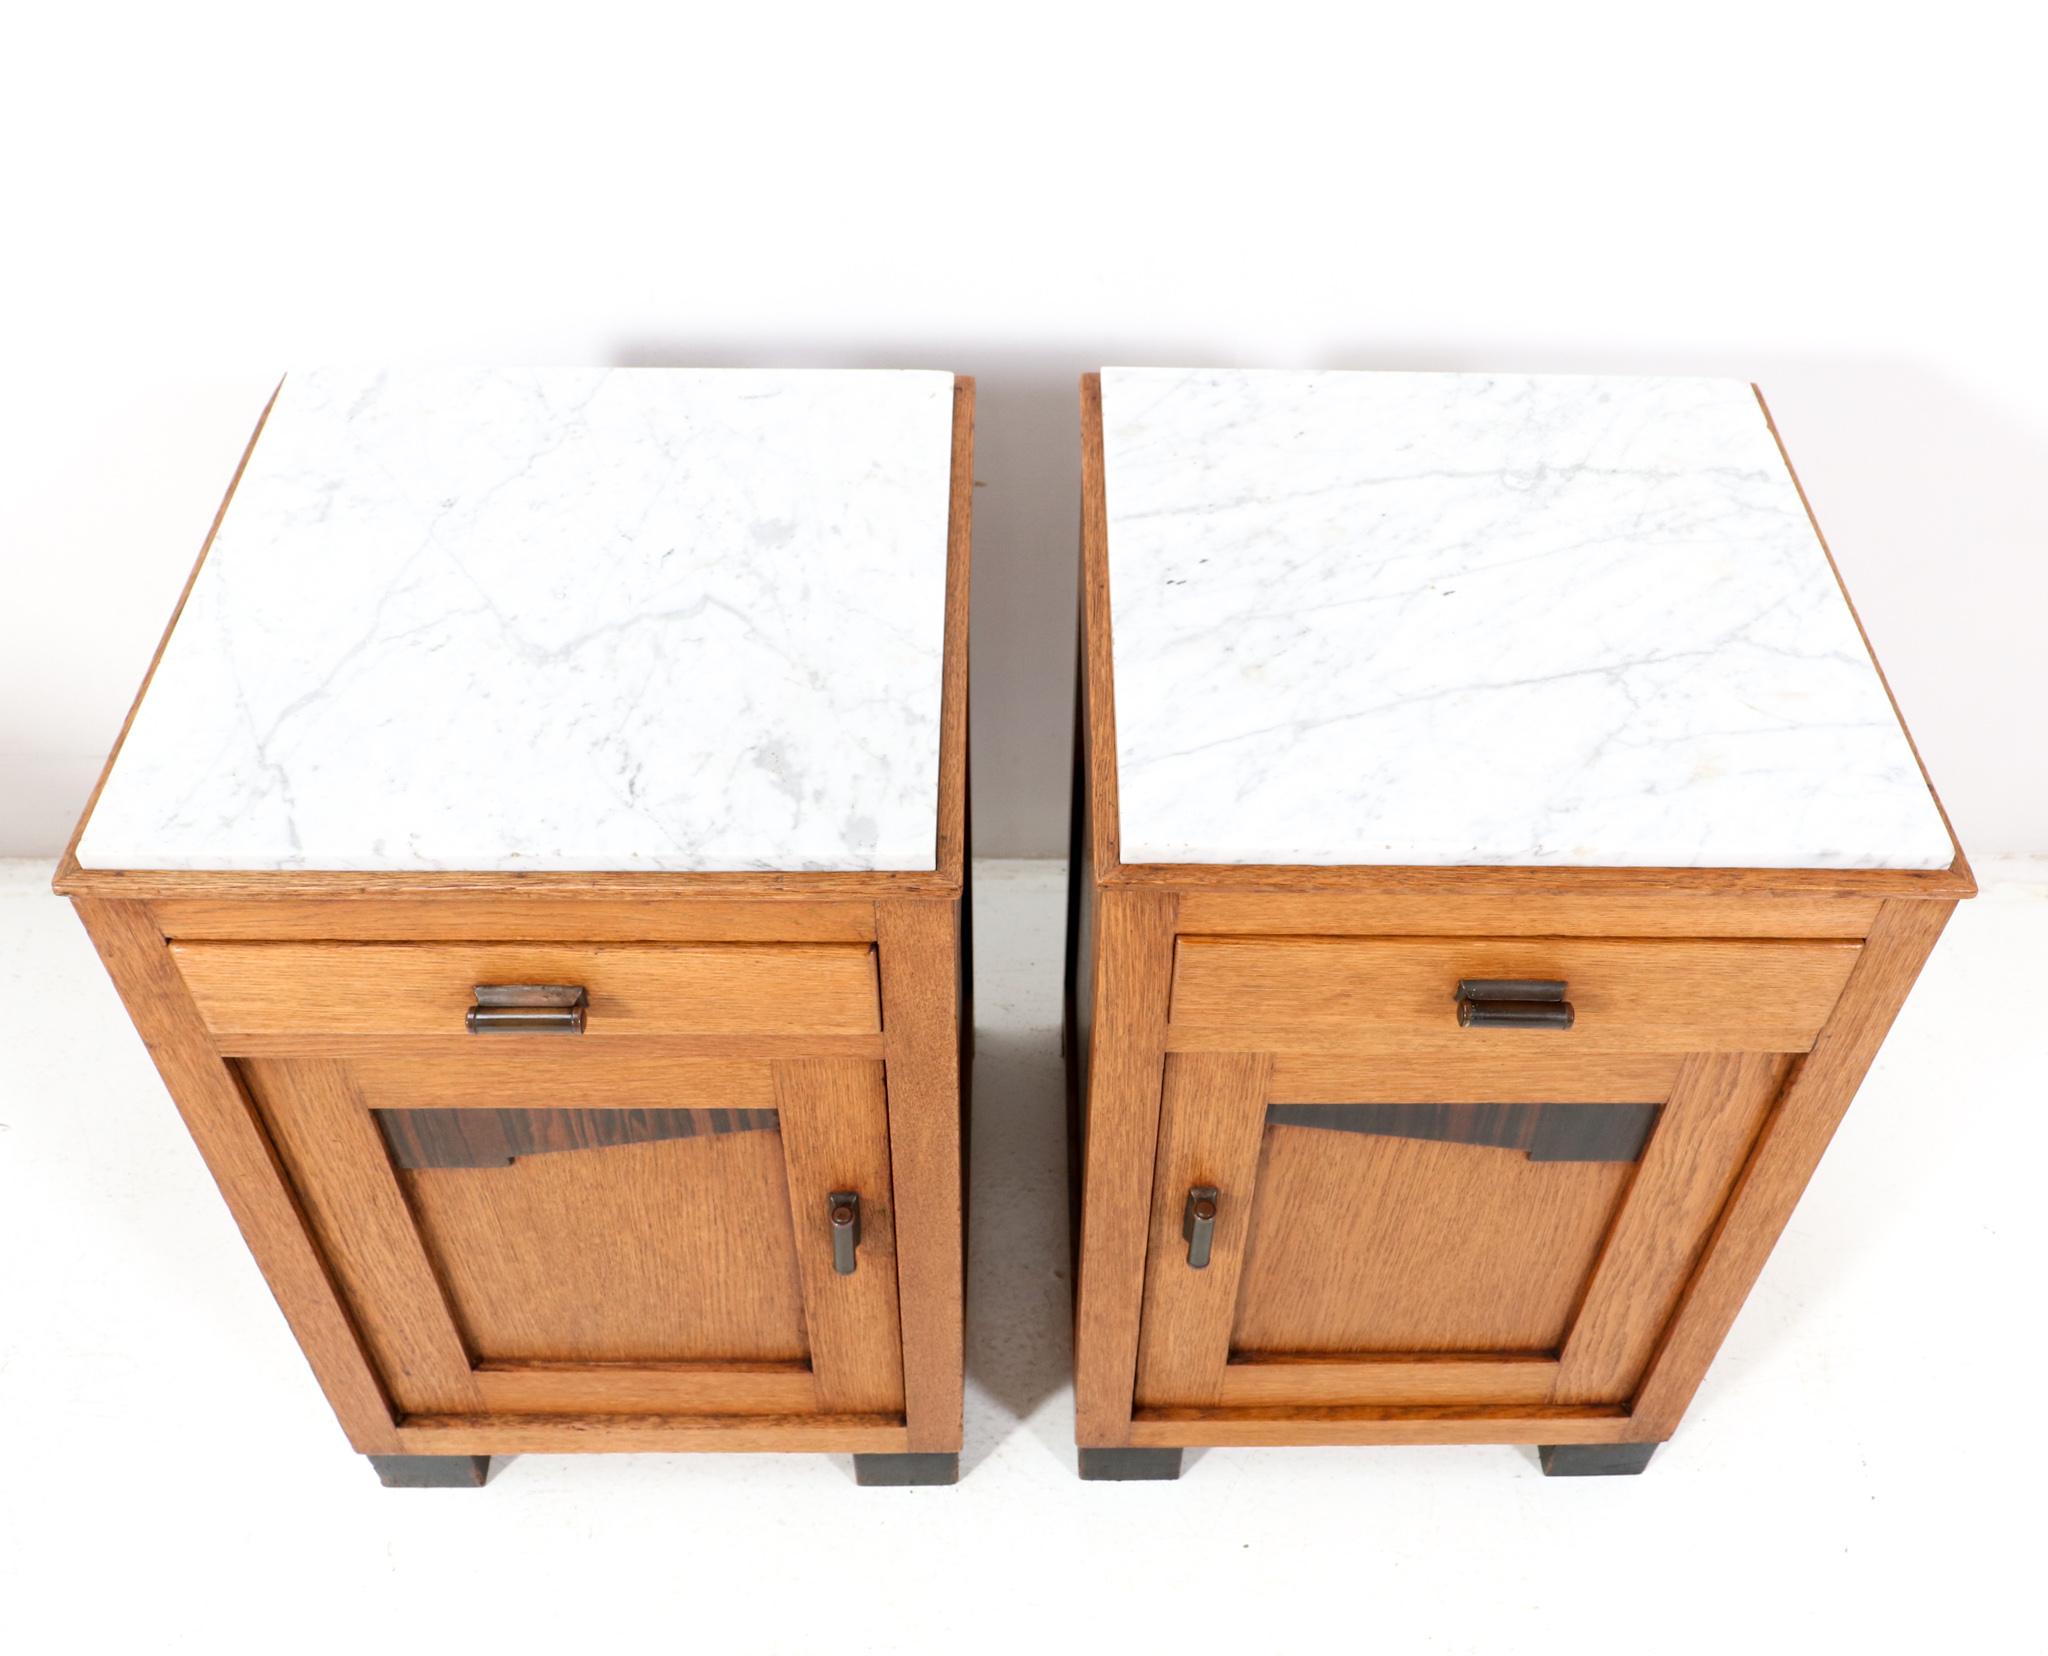 Amazing and rare pair of Art Deco Amsterdamse School nightstands or bedside tables.
Striking Dutch design from the 1920s.
Oak with macassar ebony elements in the doors.
Original stylish brass handles on doors and drawers.
The white marble tops are